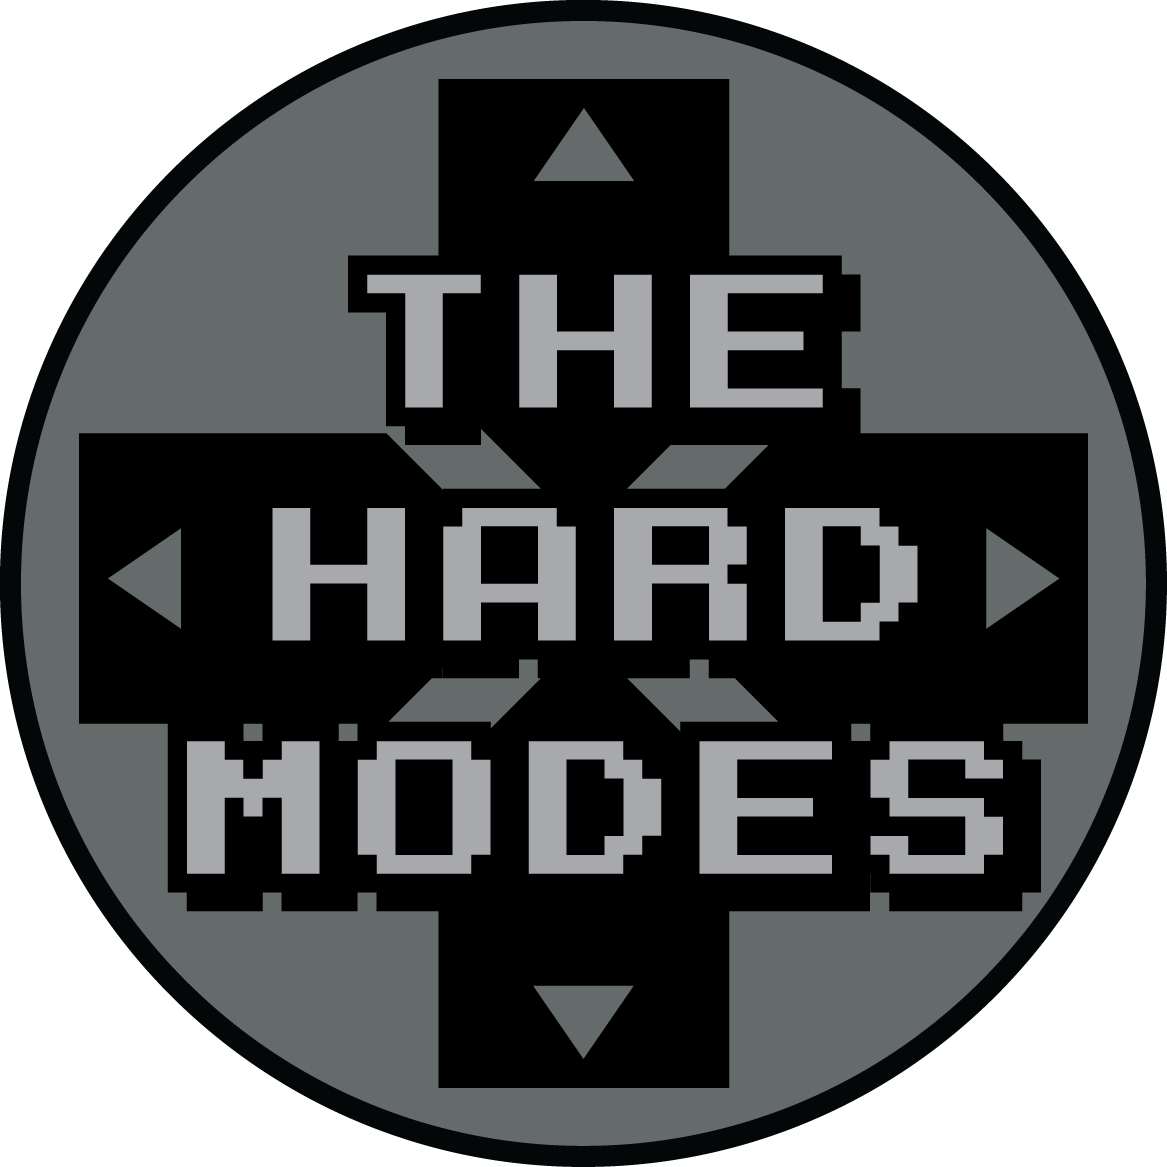 The Hard Modes